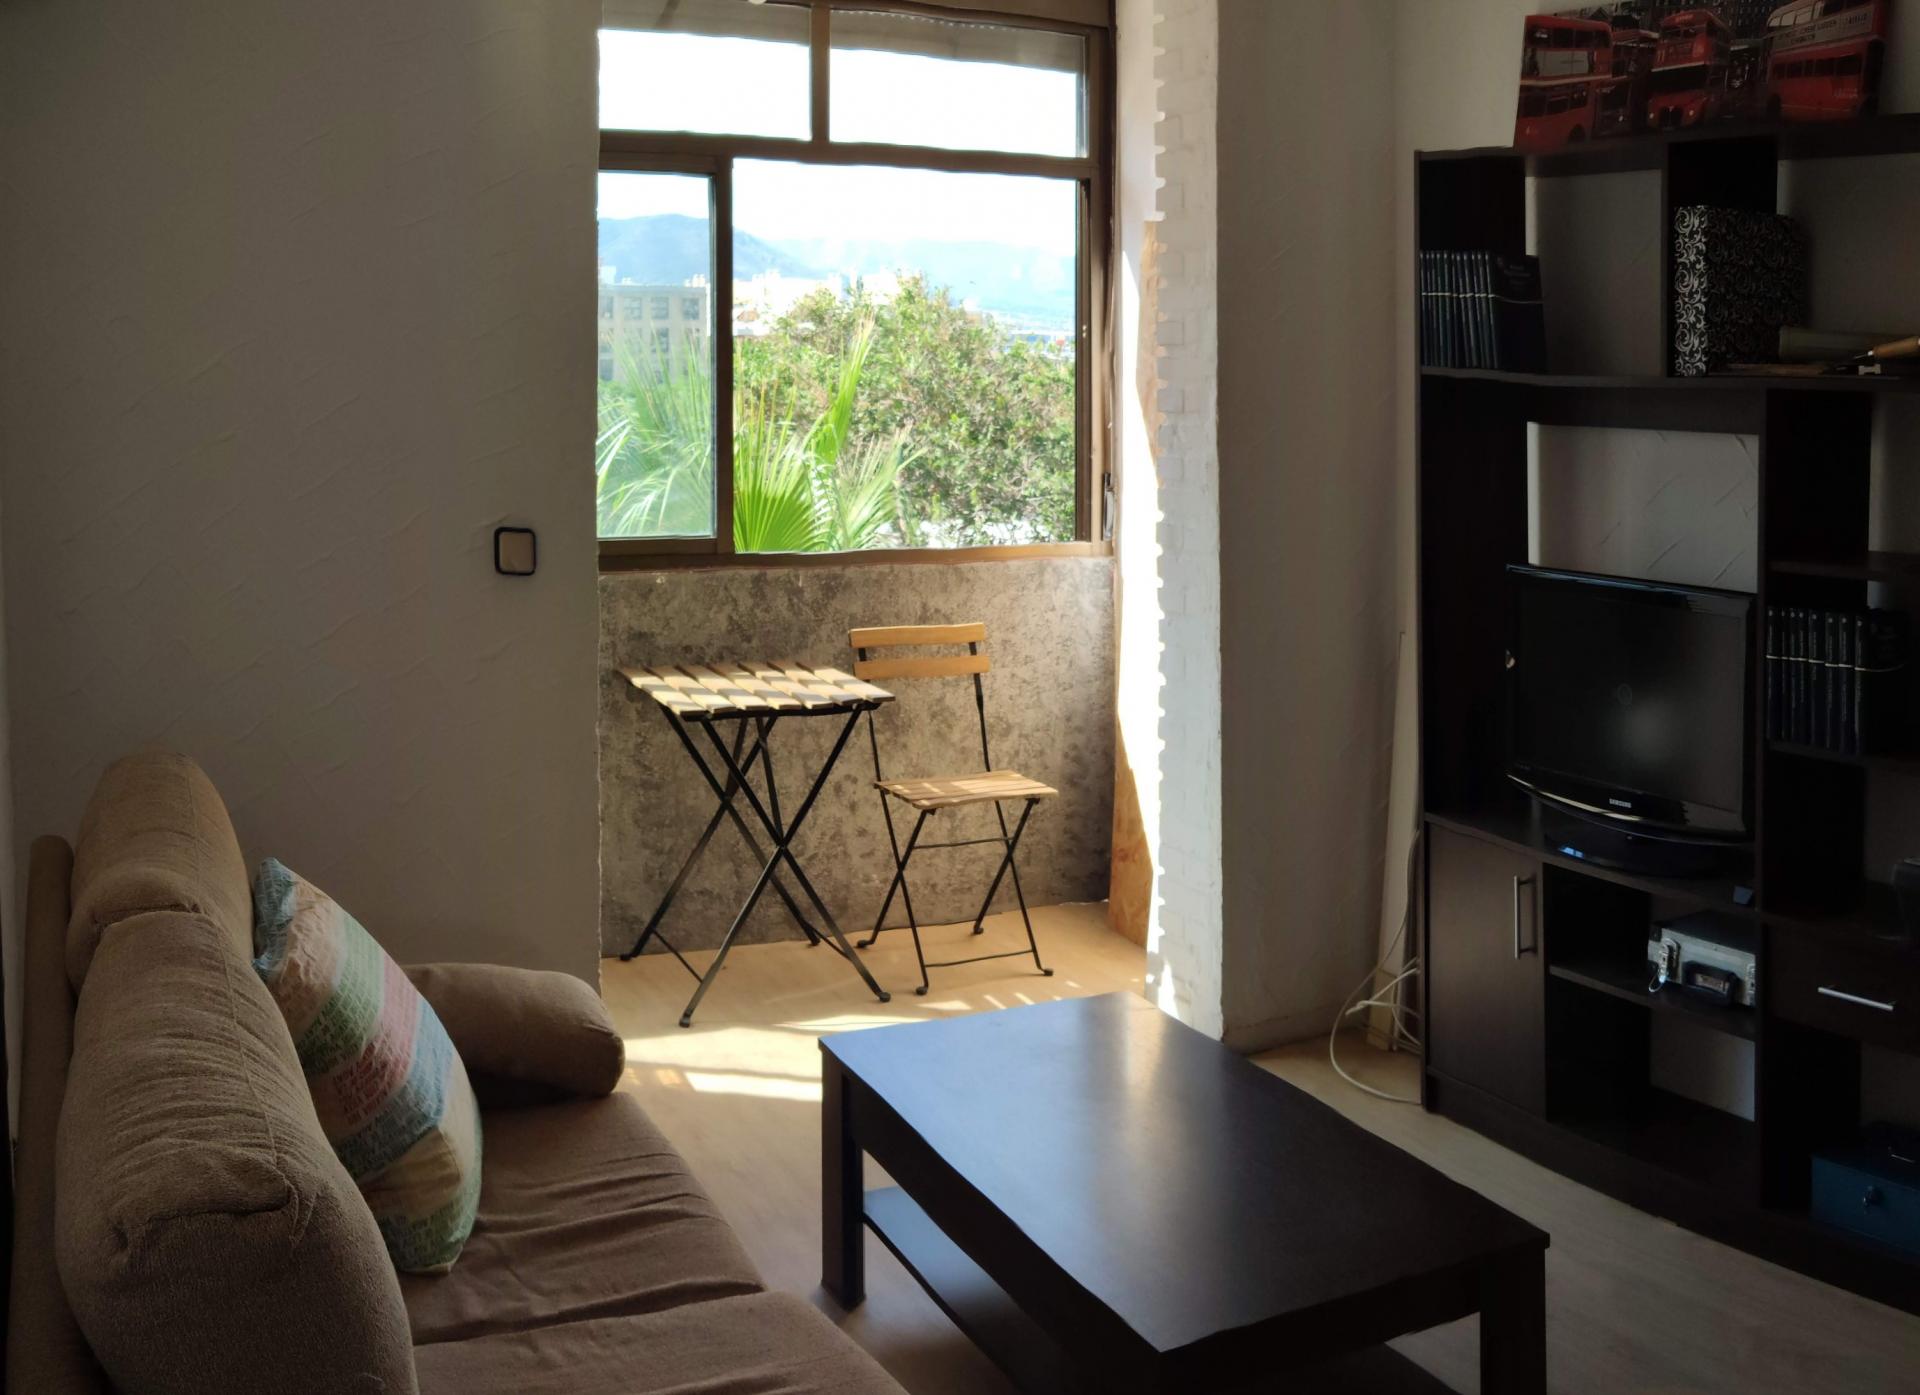 Blanca - Double room in Malaga in private apartment centrally located